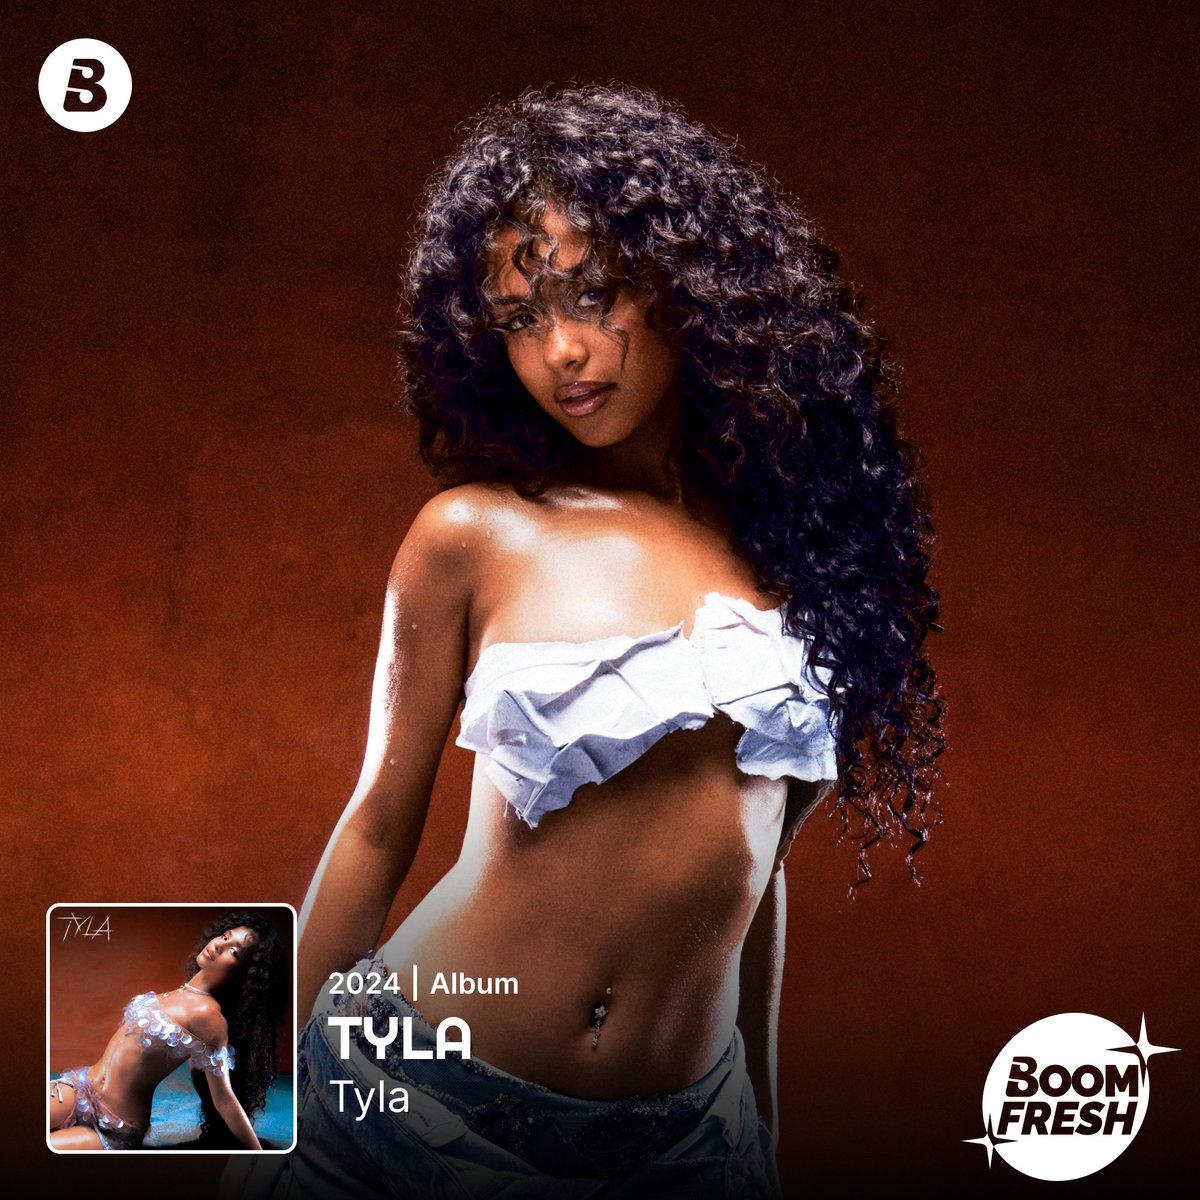 #TYLA by @Tyllaaaaaaa ! Out now on Boomplay, stream it! 🎧： Boom.lnk.to/TYLA @SonyMusicAfrica #Boomplay #Tyla #NewMusic #Boomfresh